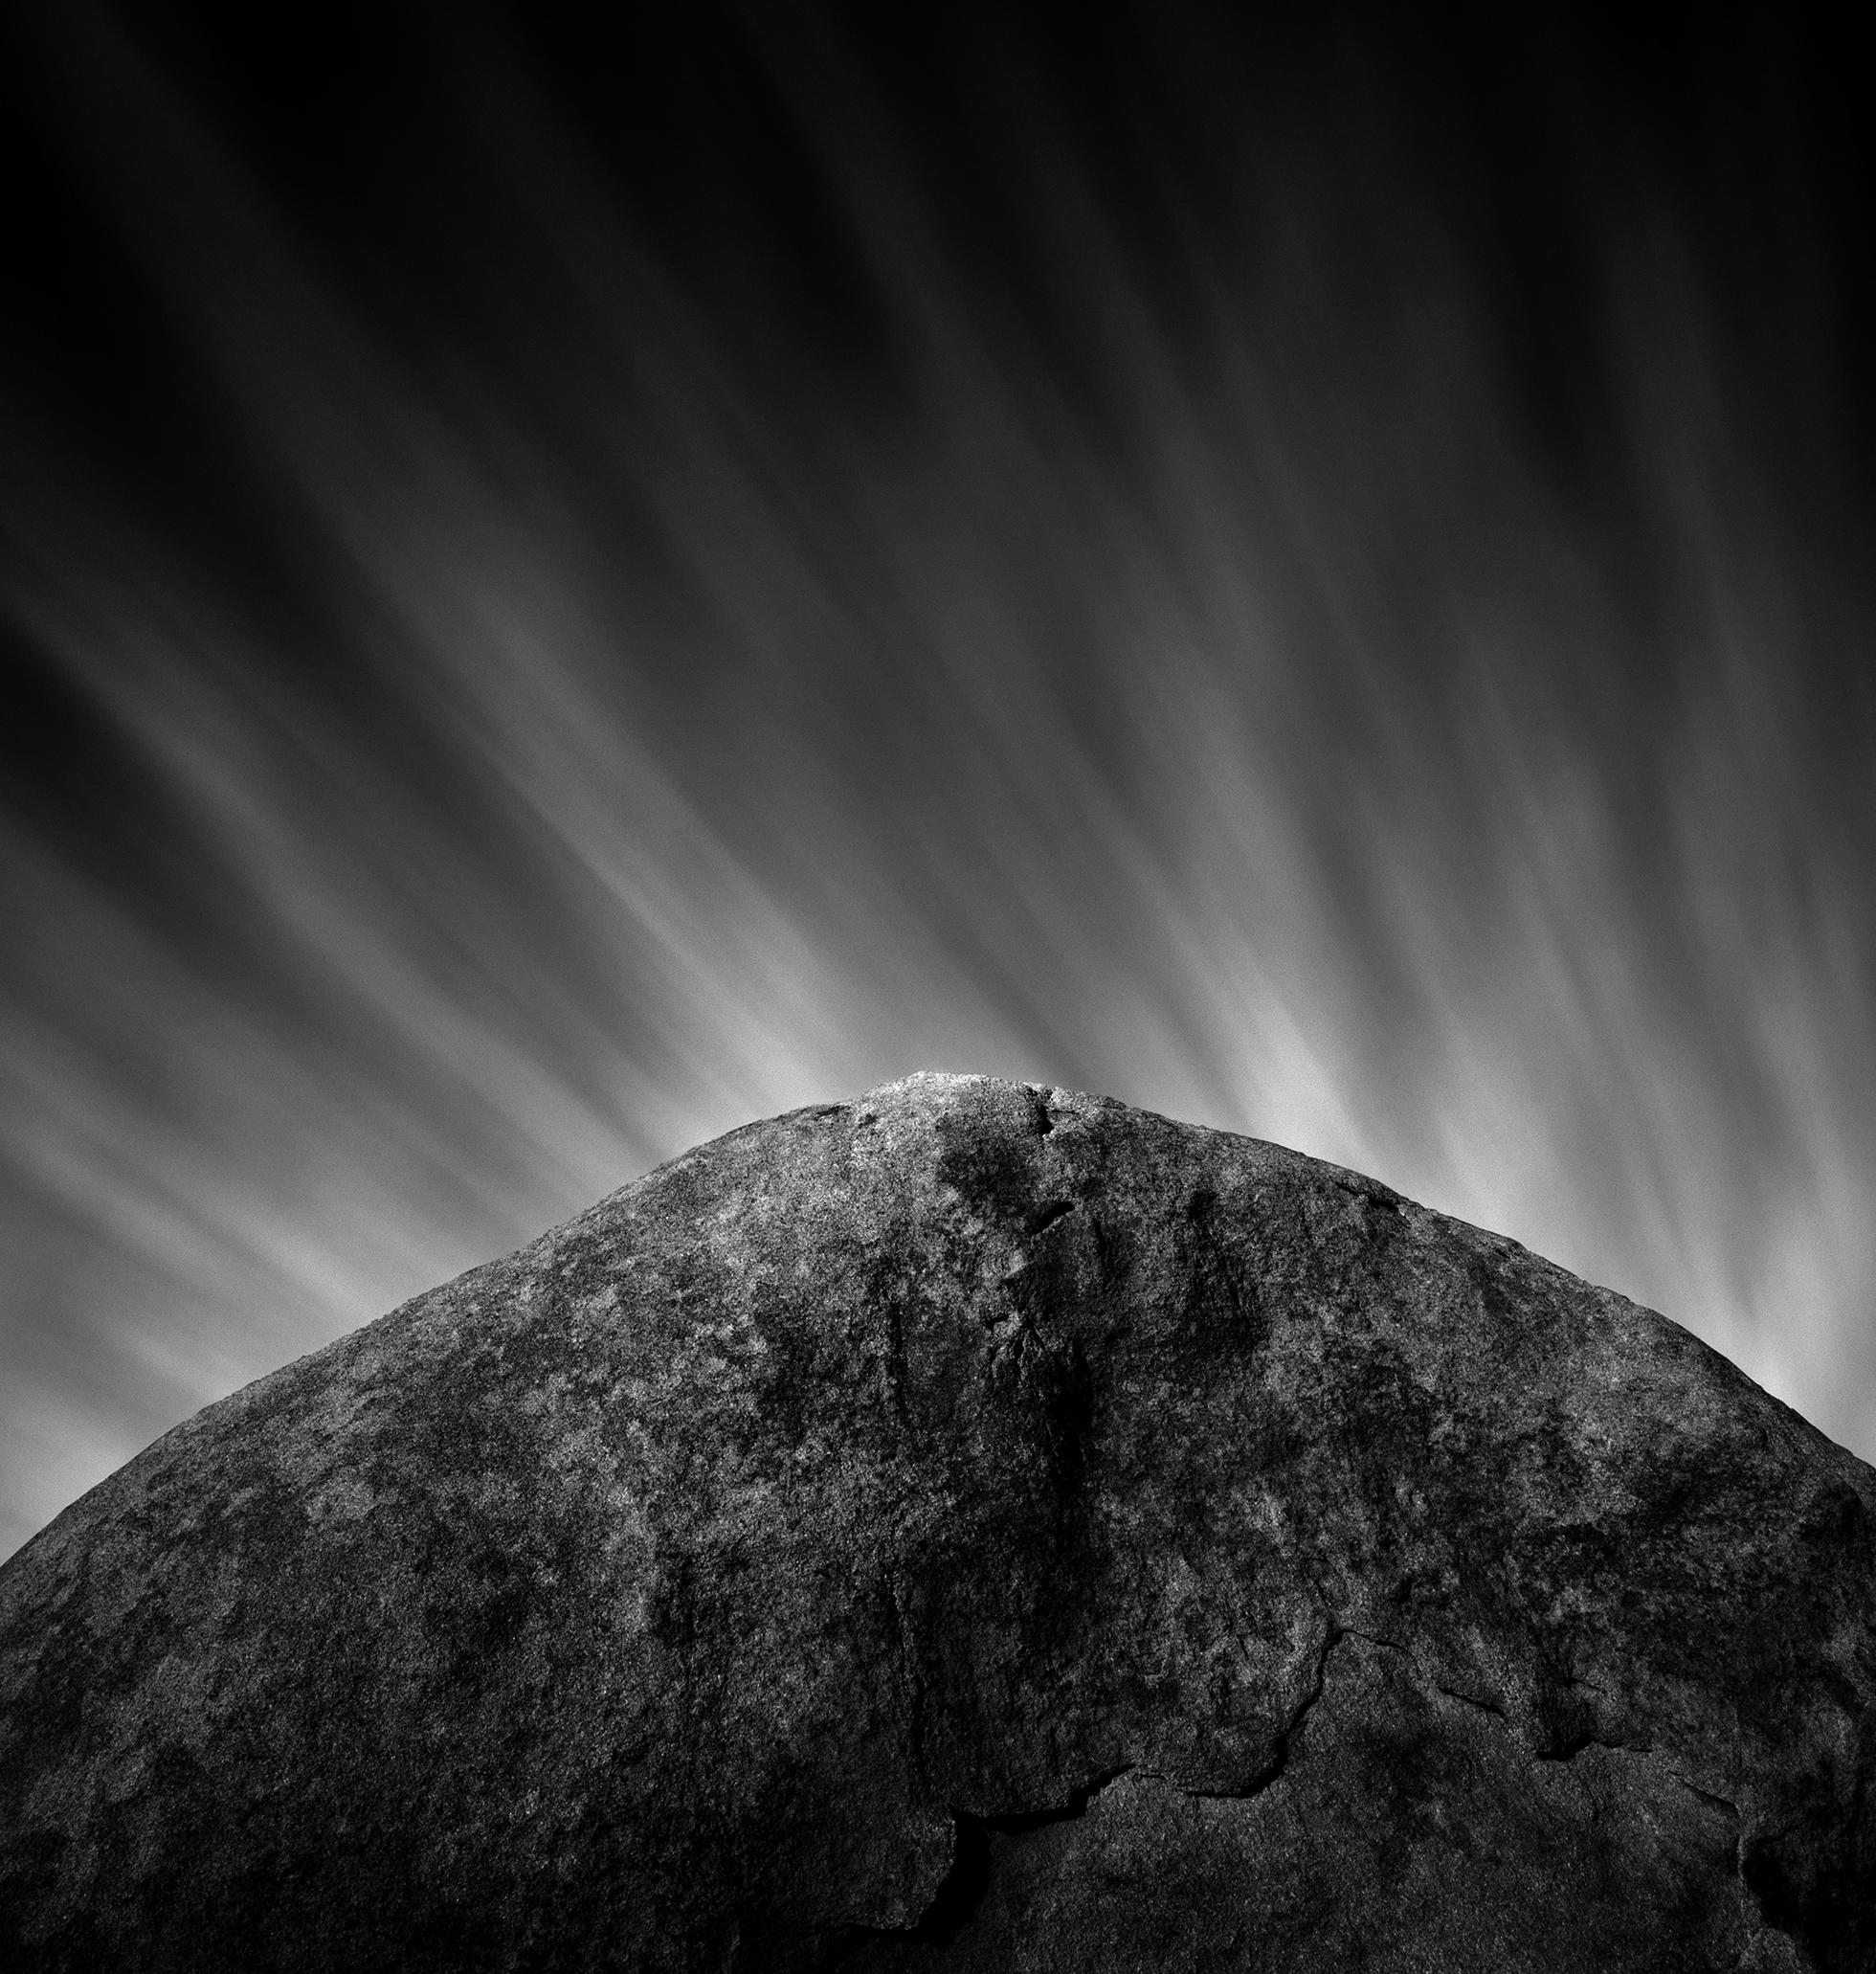 A close-up of a long exposure of a boulder in Joshua Tree National Park.